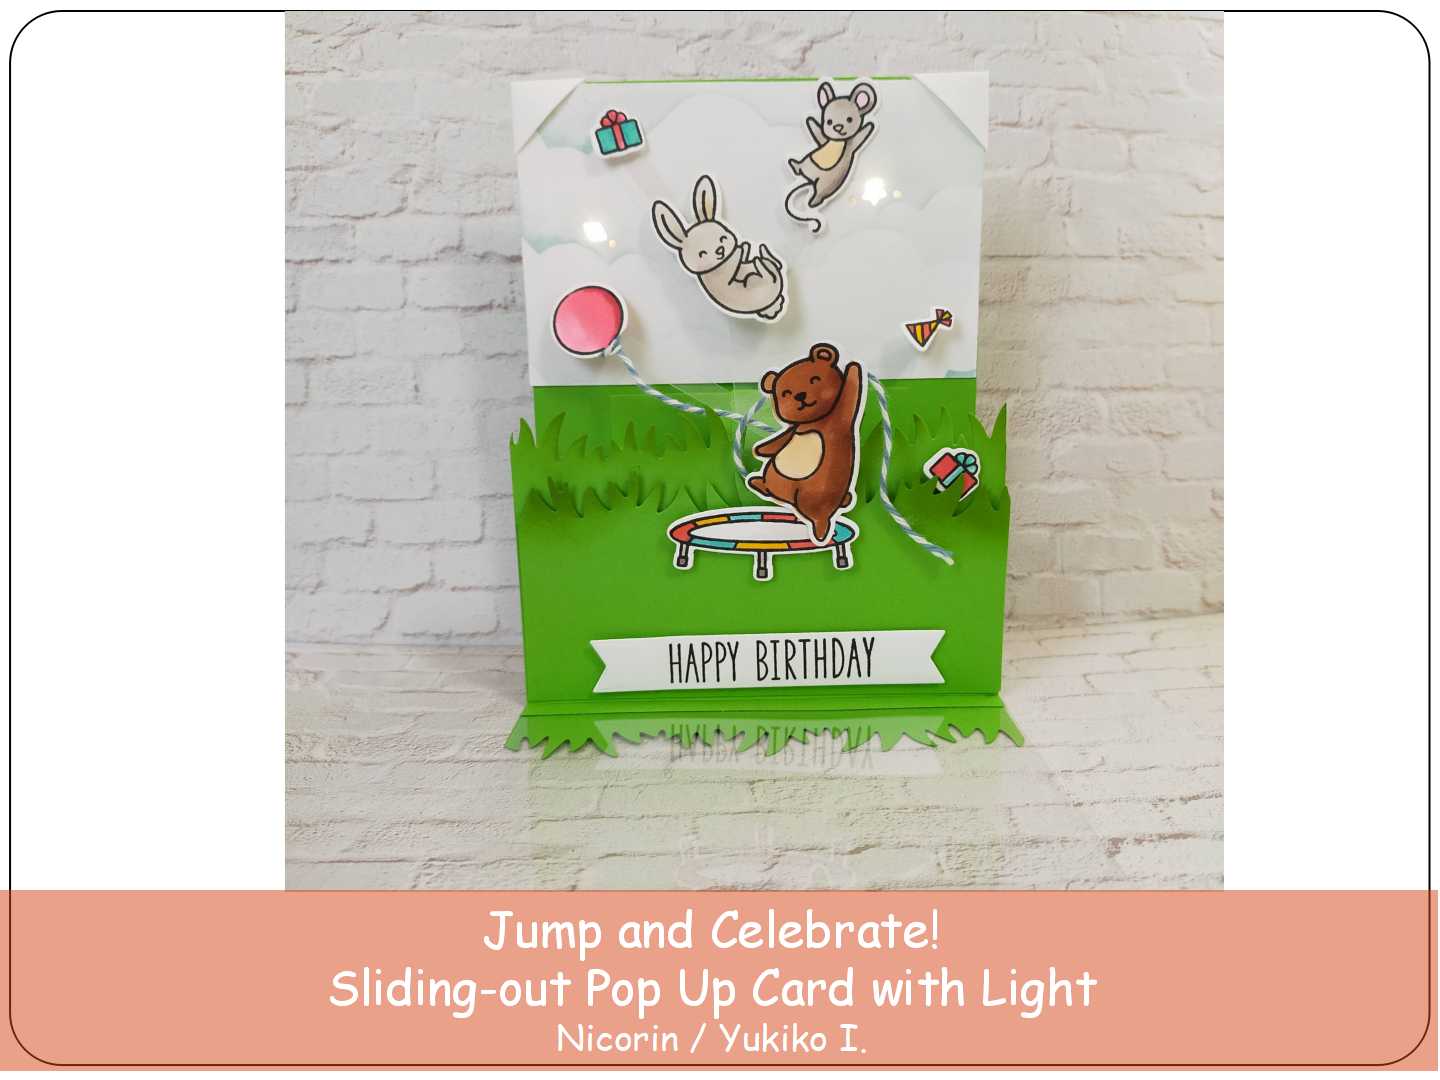 Jump and Celebrate! ～Sliding-out Pop-Up Card with Light